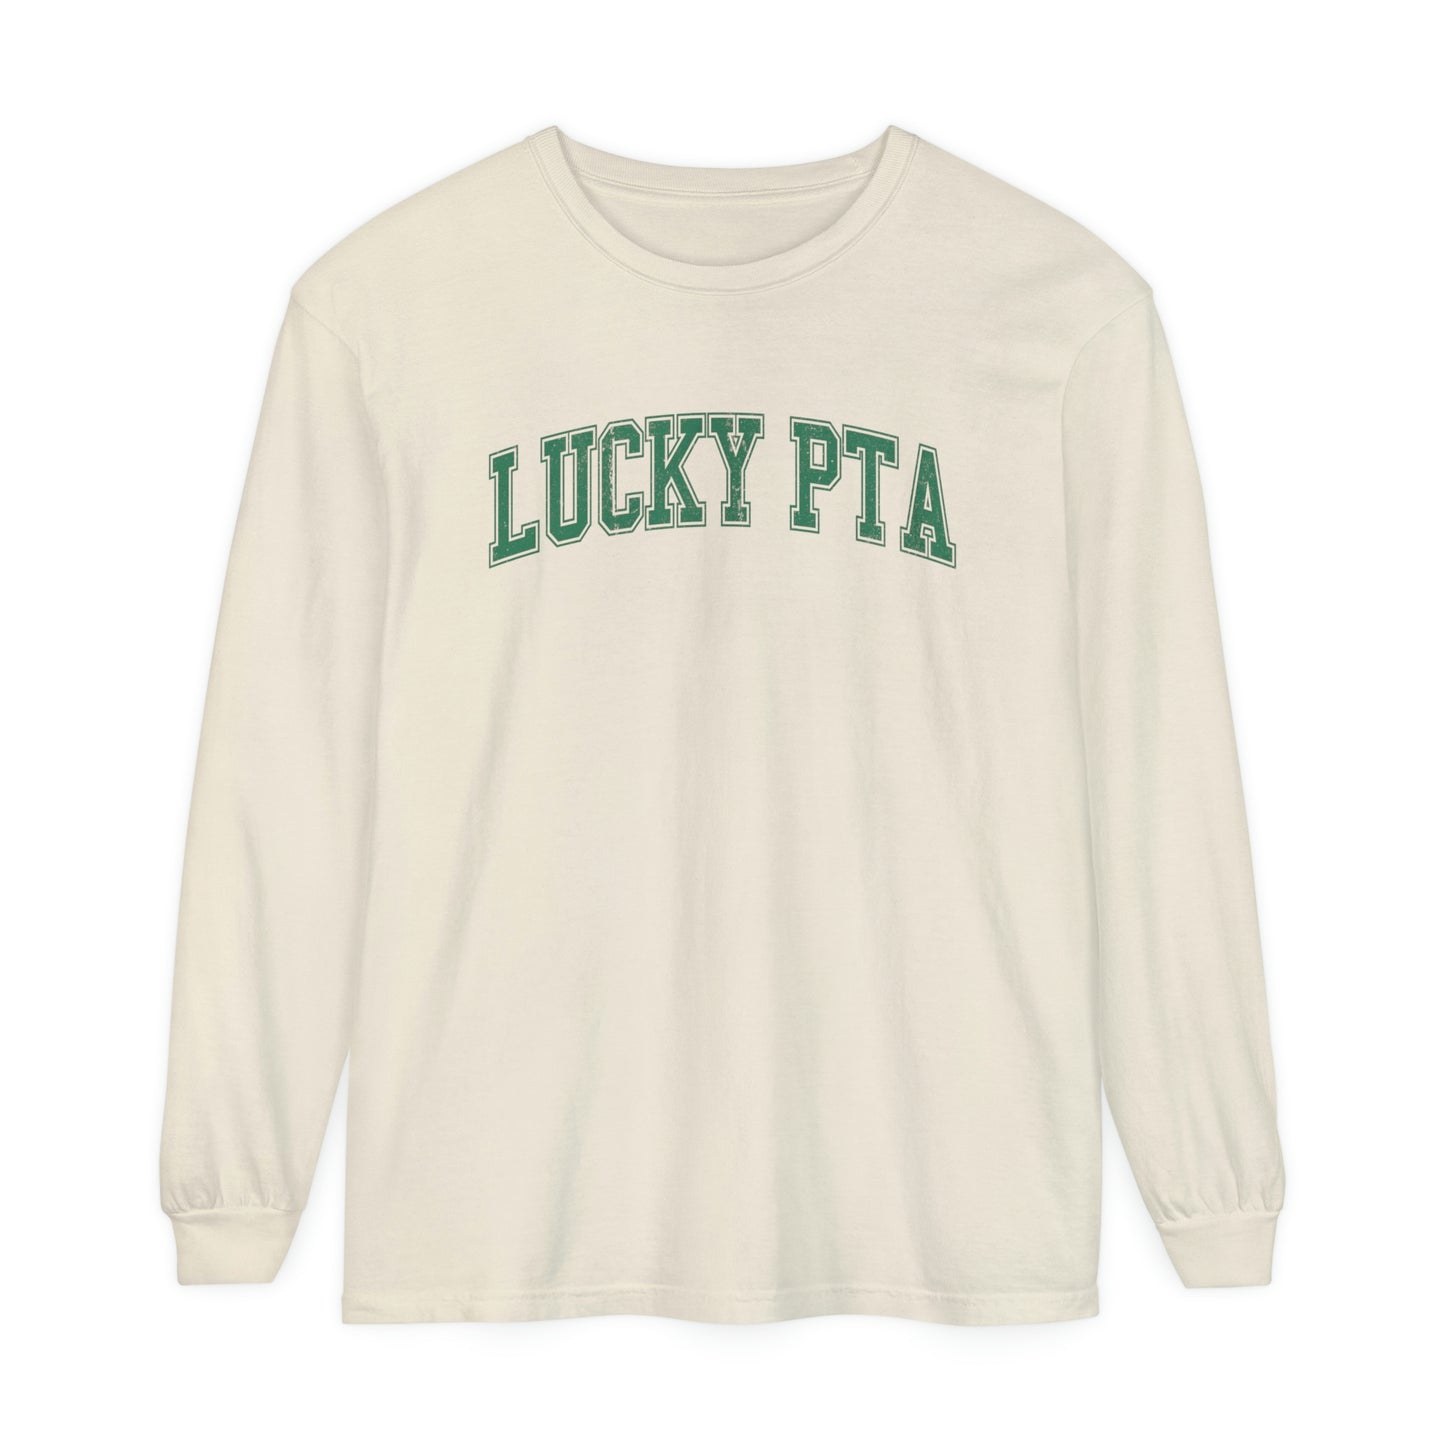 Lucky PTA Distressed Long Sleeve Comfort Colors T-Shirt